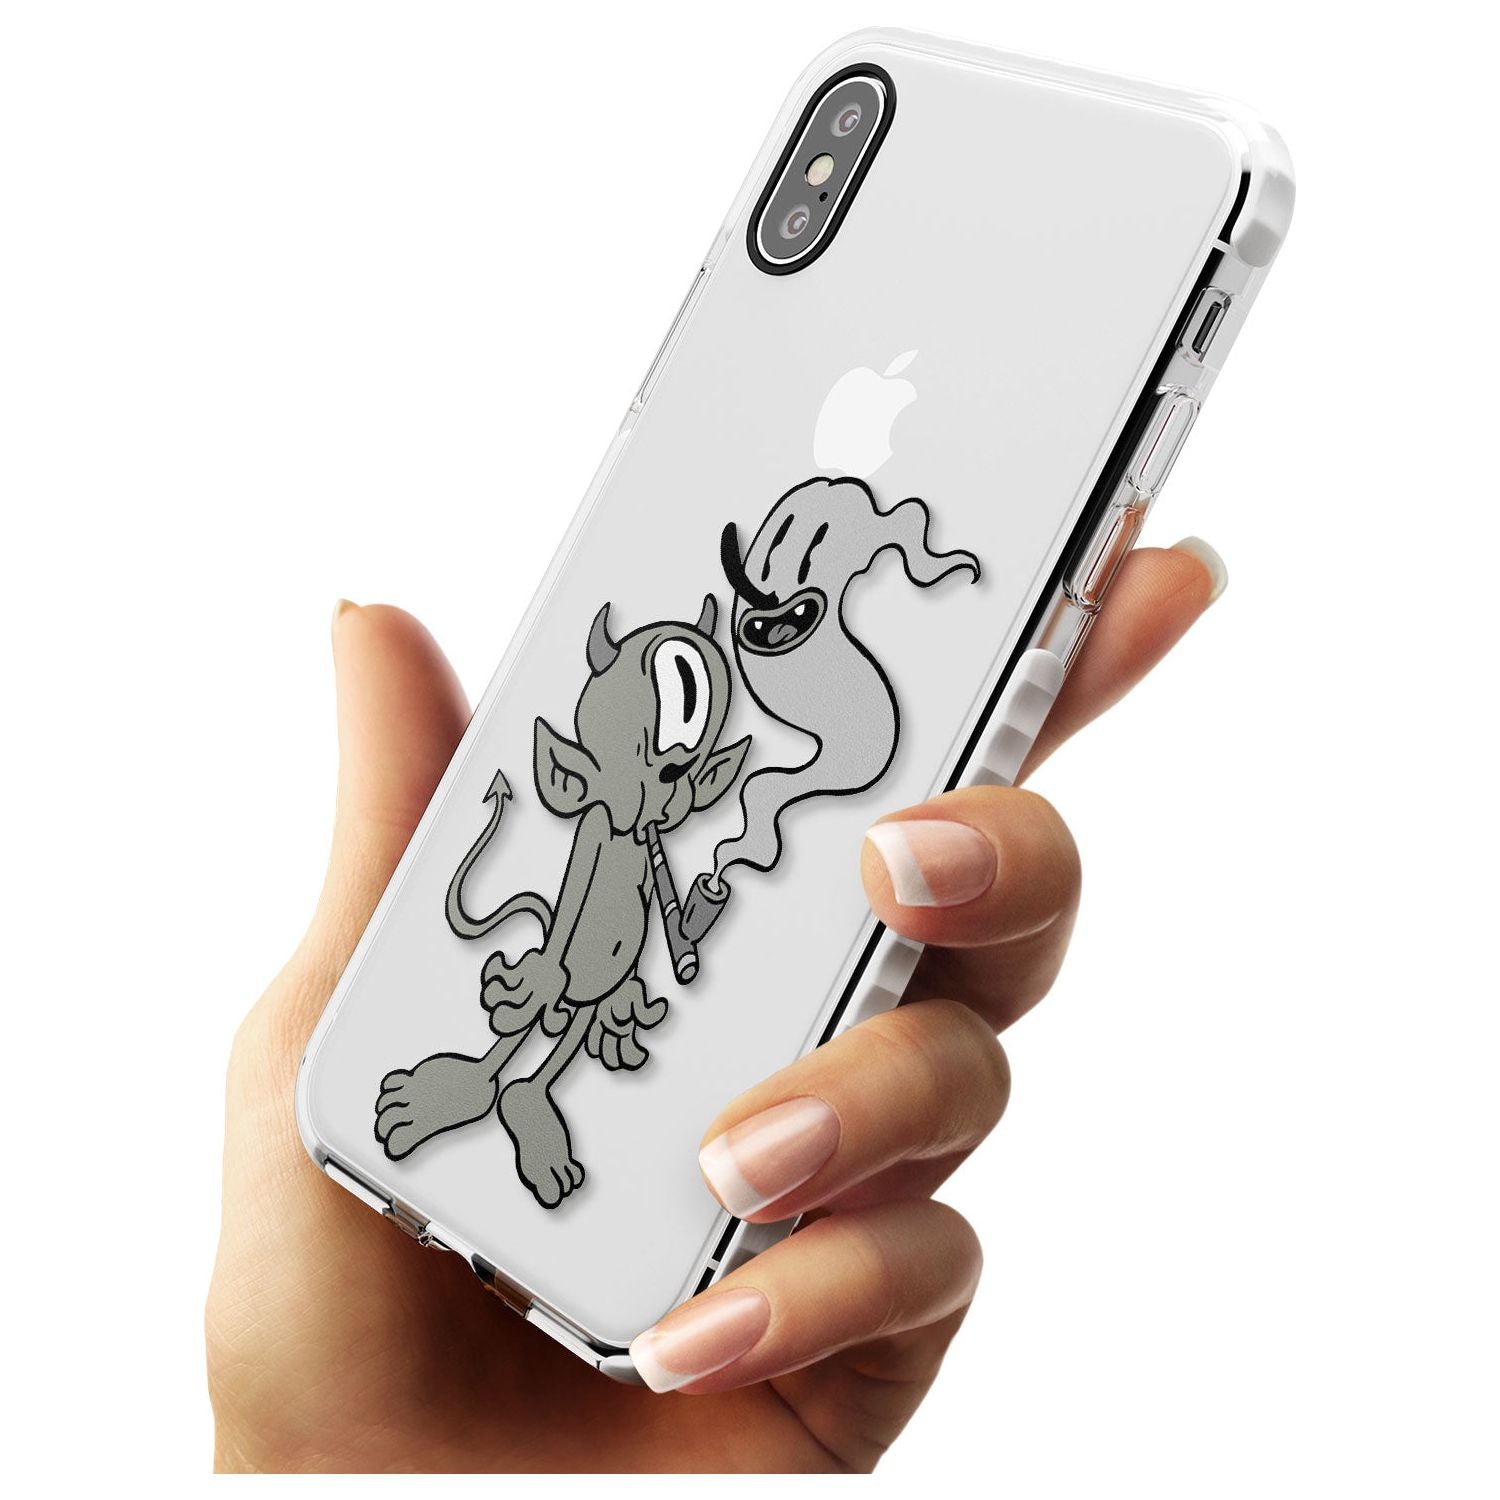 Pipe Goblin Impact Phone Case for iPhone X XS Max XR